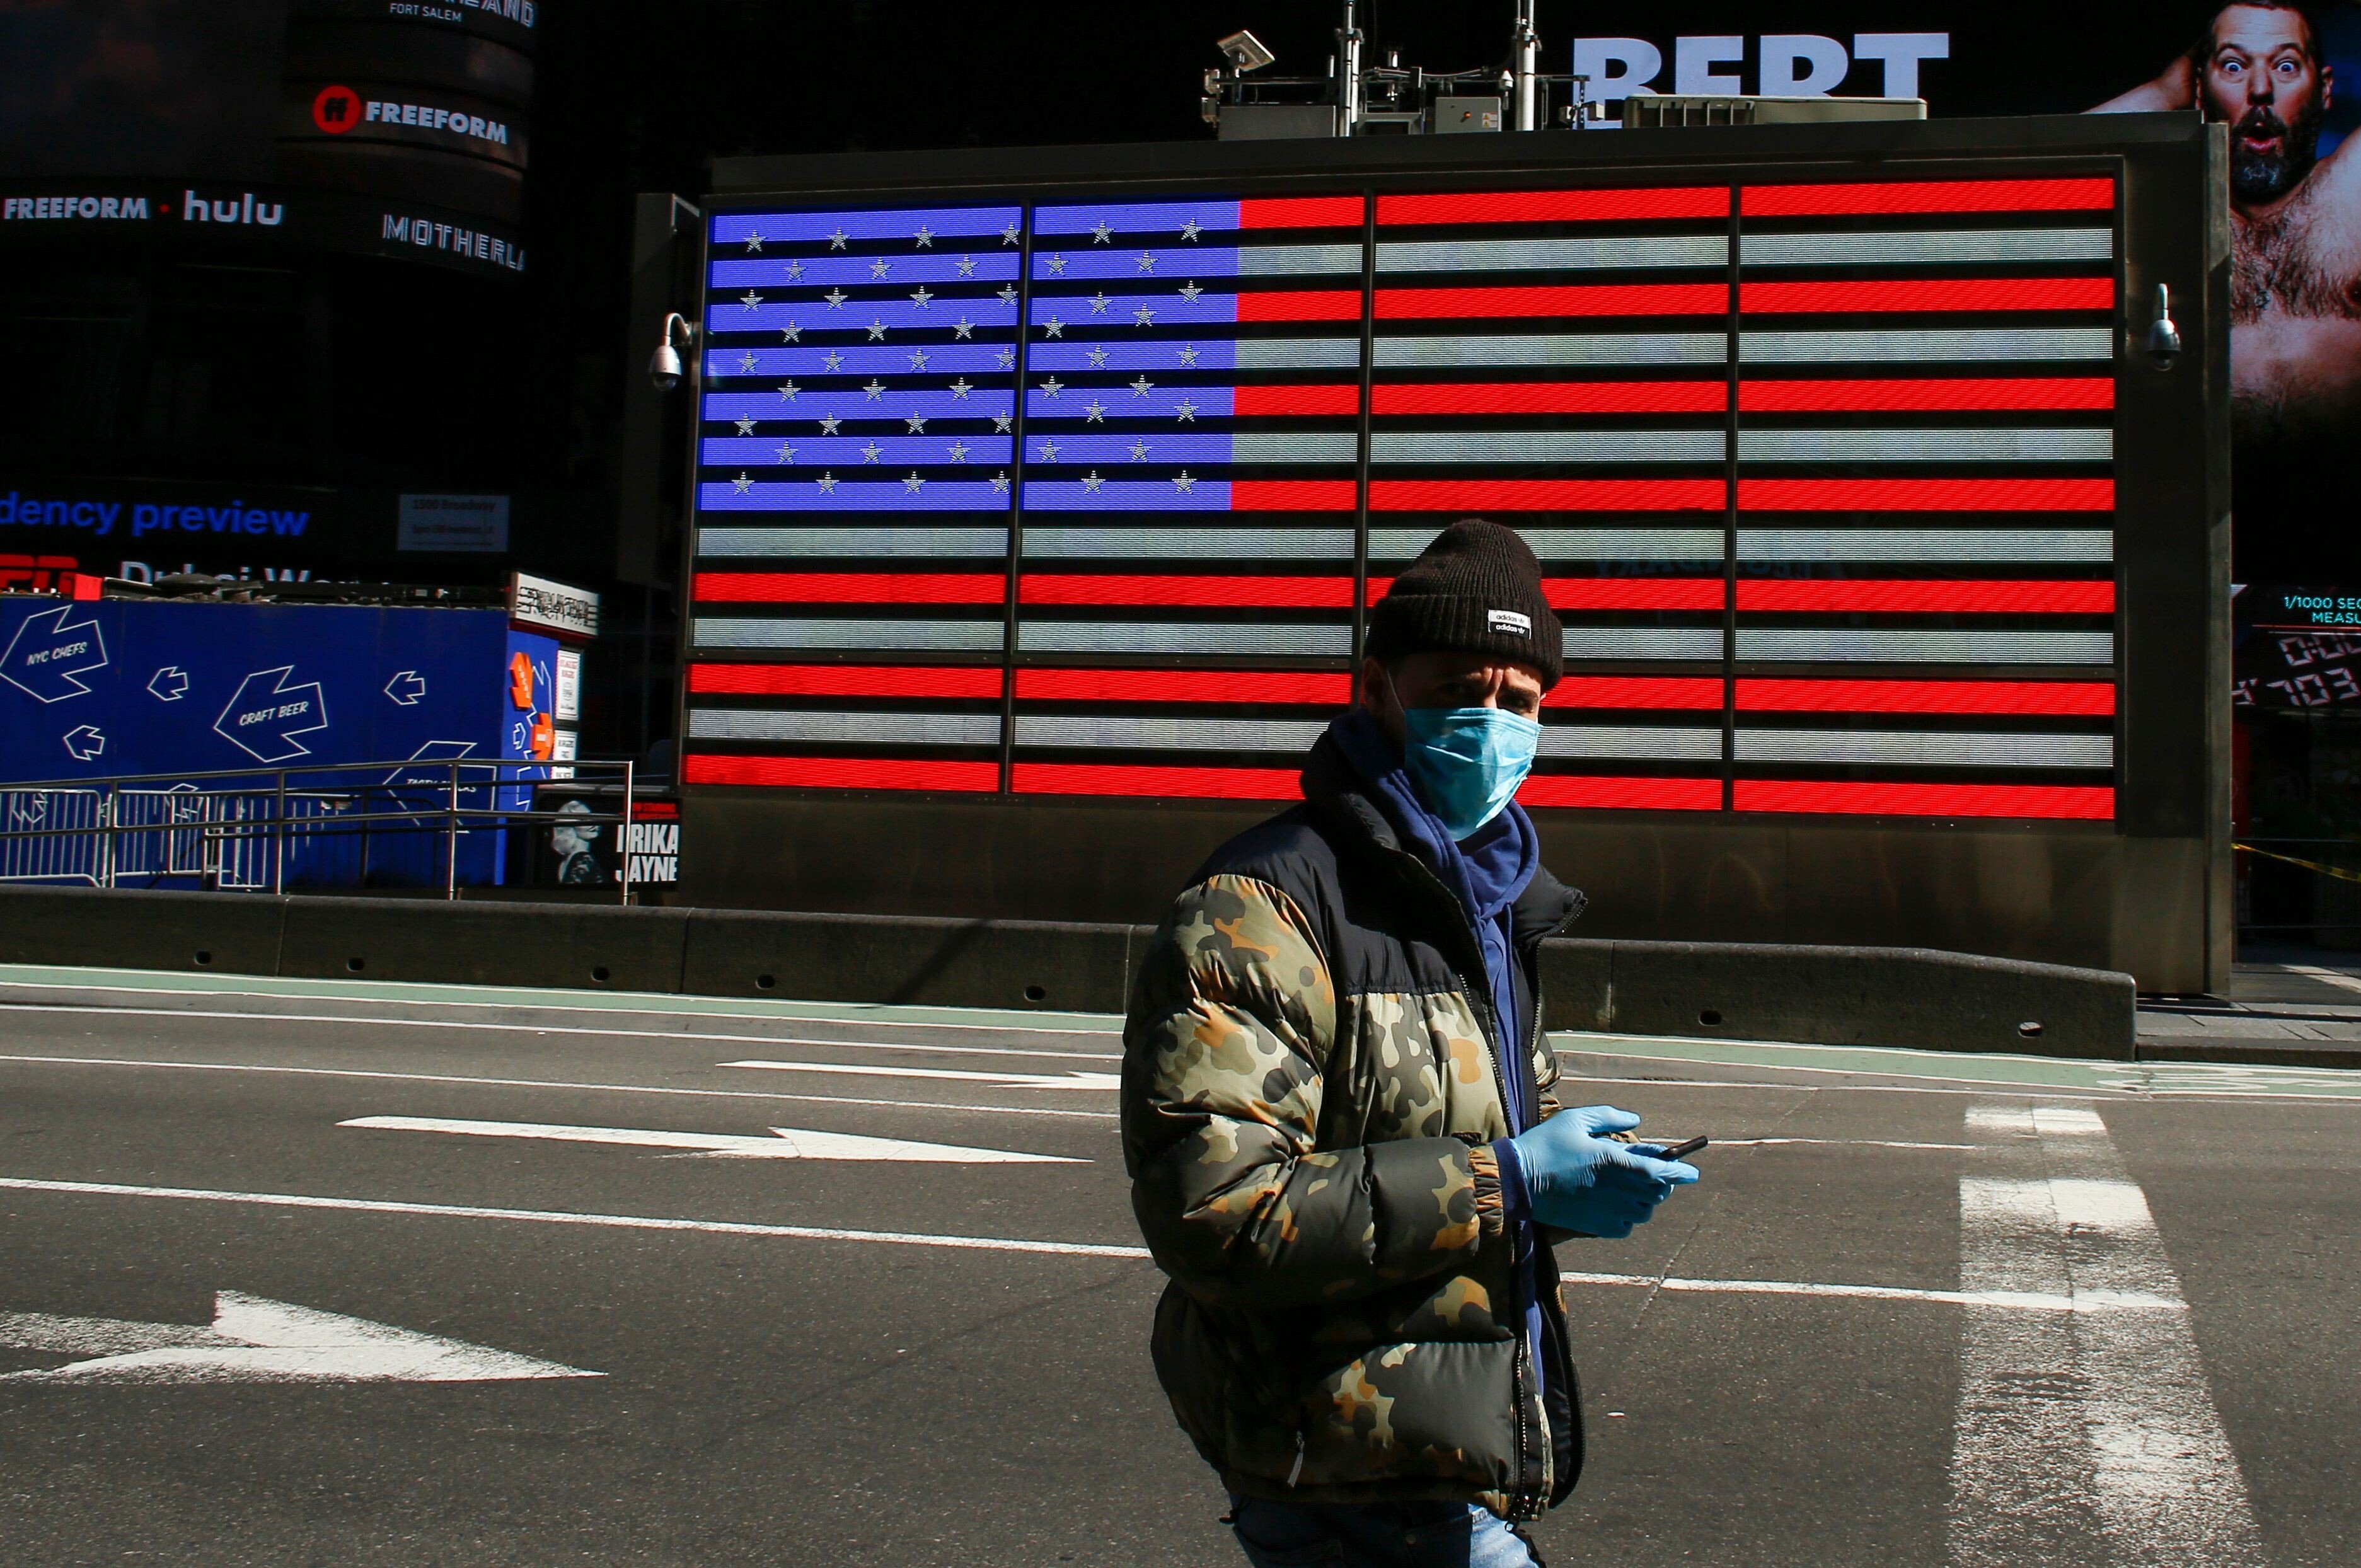 A man wearing a mask checks his phone in Times Square in New York on March 22, 2020. Technology has fragmented the media landscape, fuelling a preference for “personalised” information. In this environment, neutral reporting doesn’t attract as much attention as inflammatory reporting. Photo: AFP